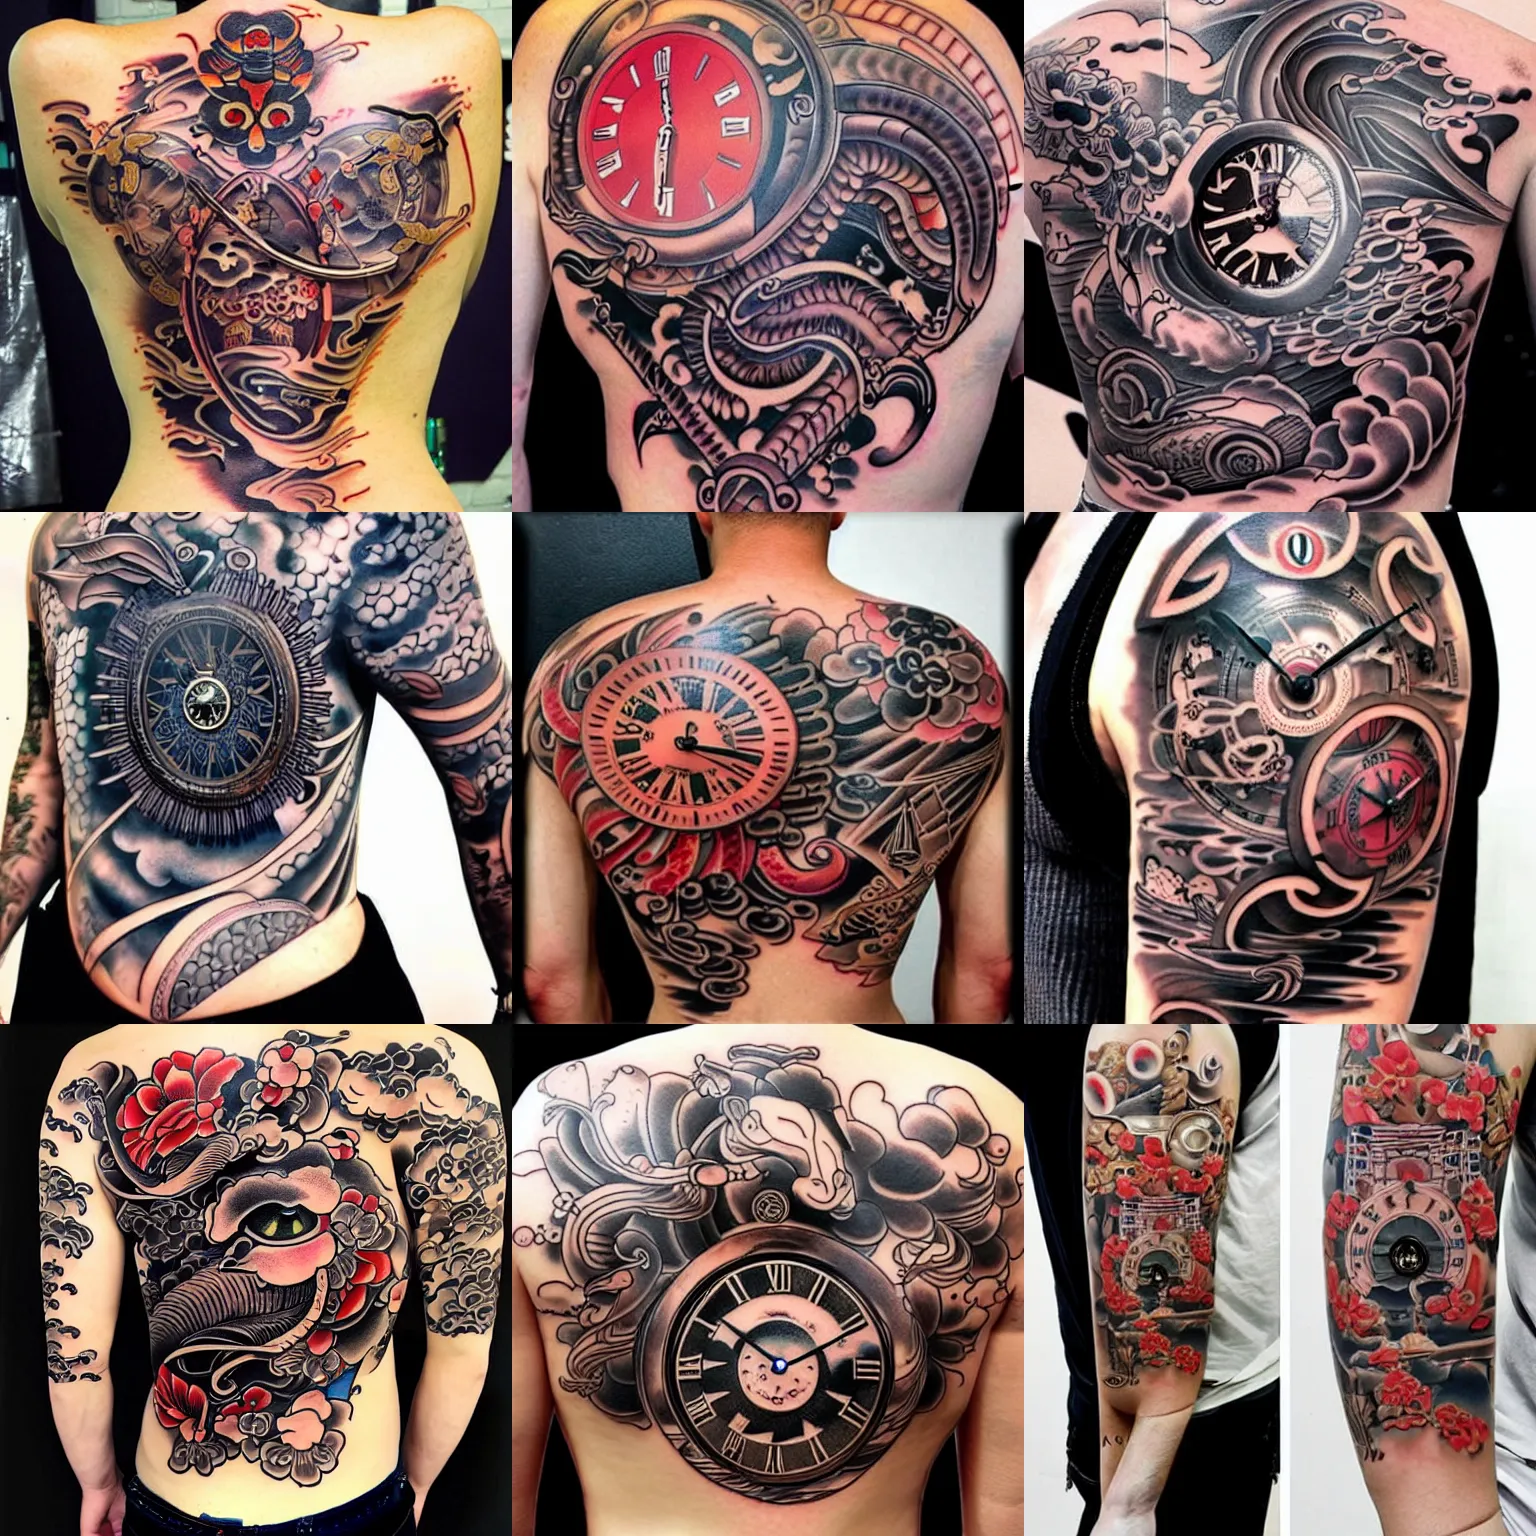 Tattoo Artists In Pune: Get Inked From These 7 Tattoo Artists In The City |  WhatsHot Pune